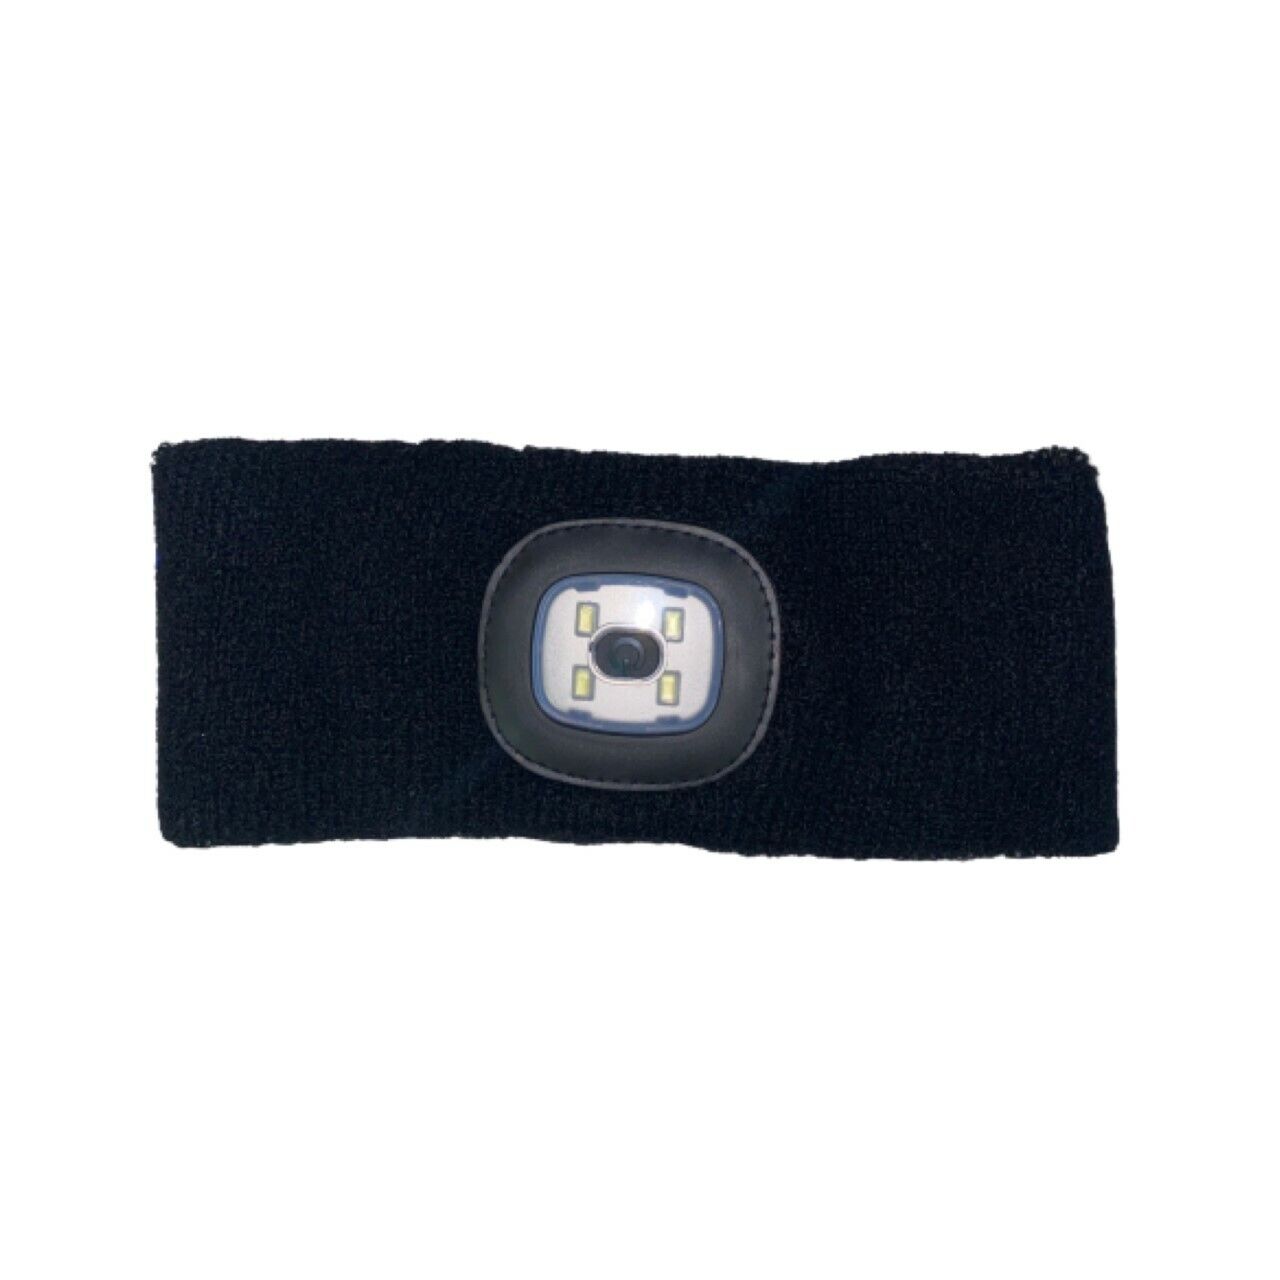 Head Band with Built In 4 SMD Light - Walking - Camping- Running 3 Brightness